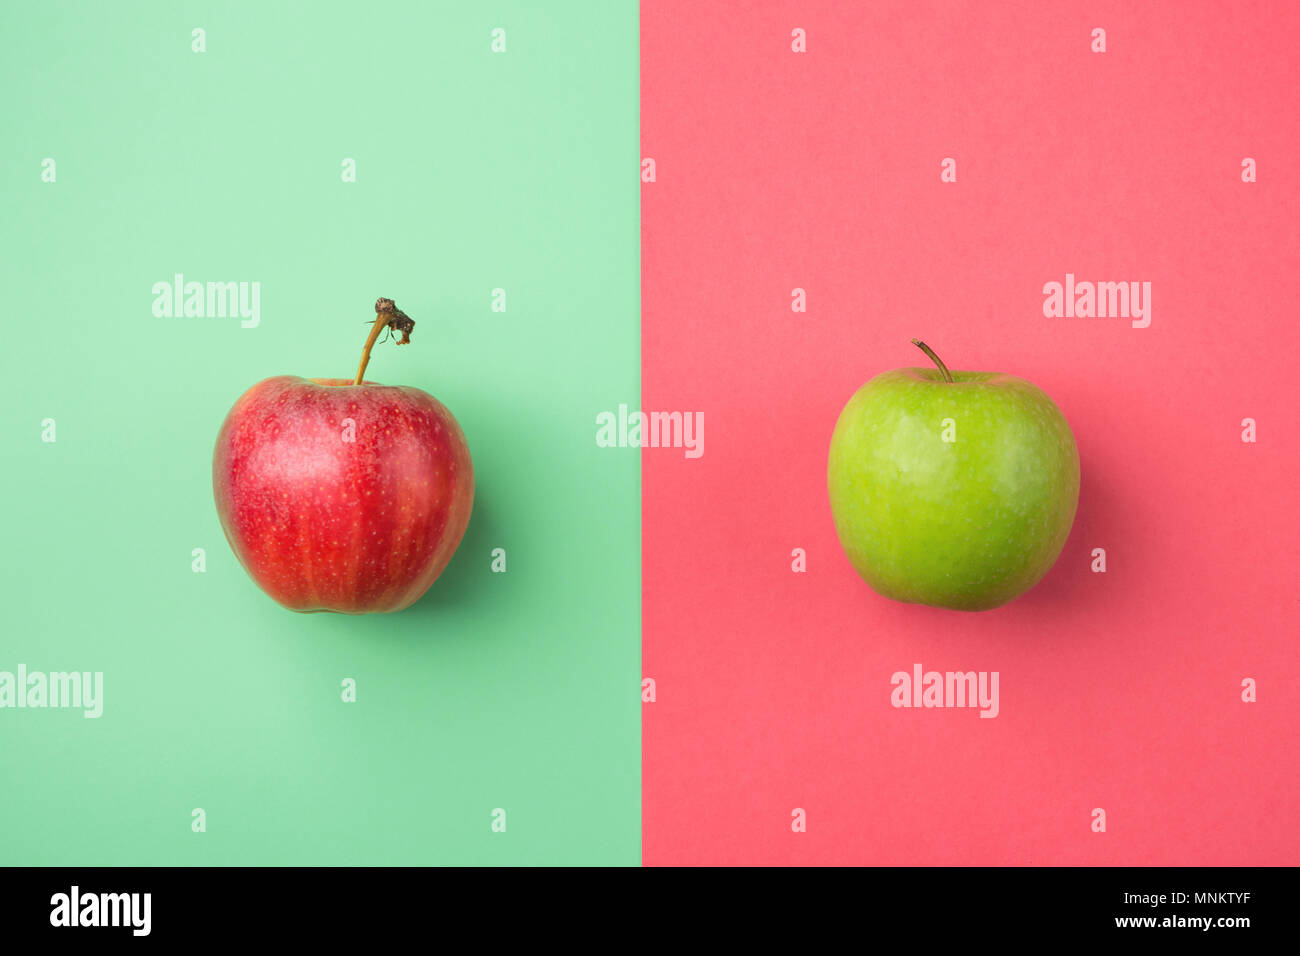 Ripe Organic Apples on Split Duotone Green Red Cherry Pink Background. Styled Creative Image. Vitamins Summer Vegan Fashion Concept. Food Poster with  Stock Photo